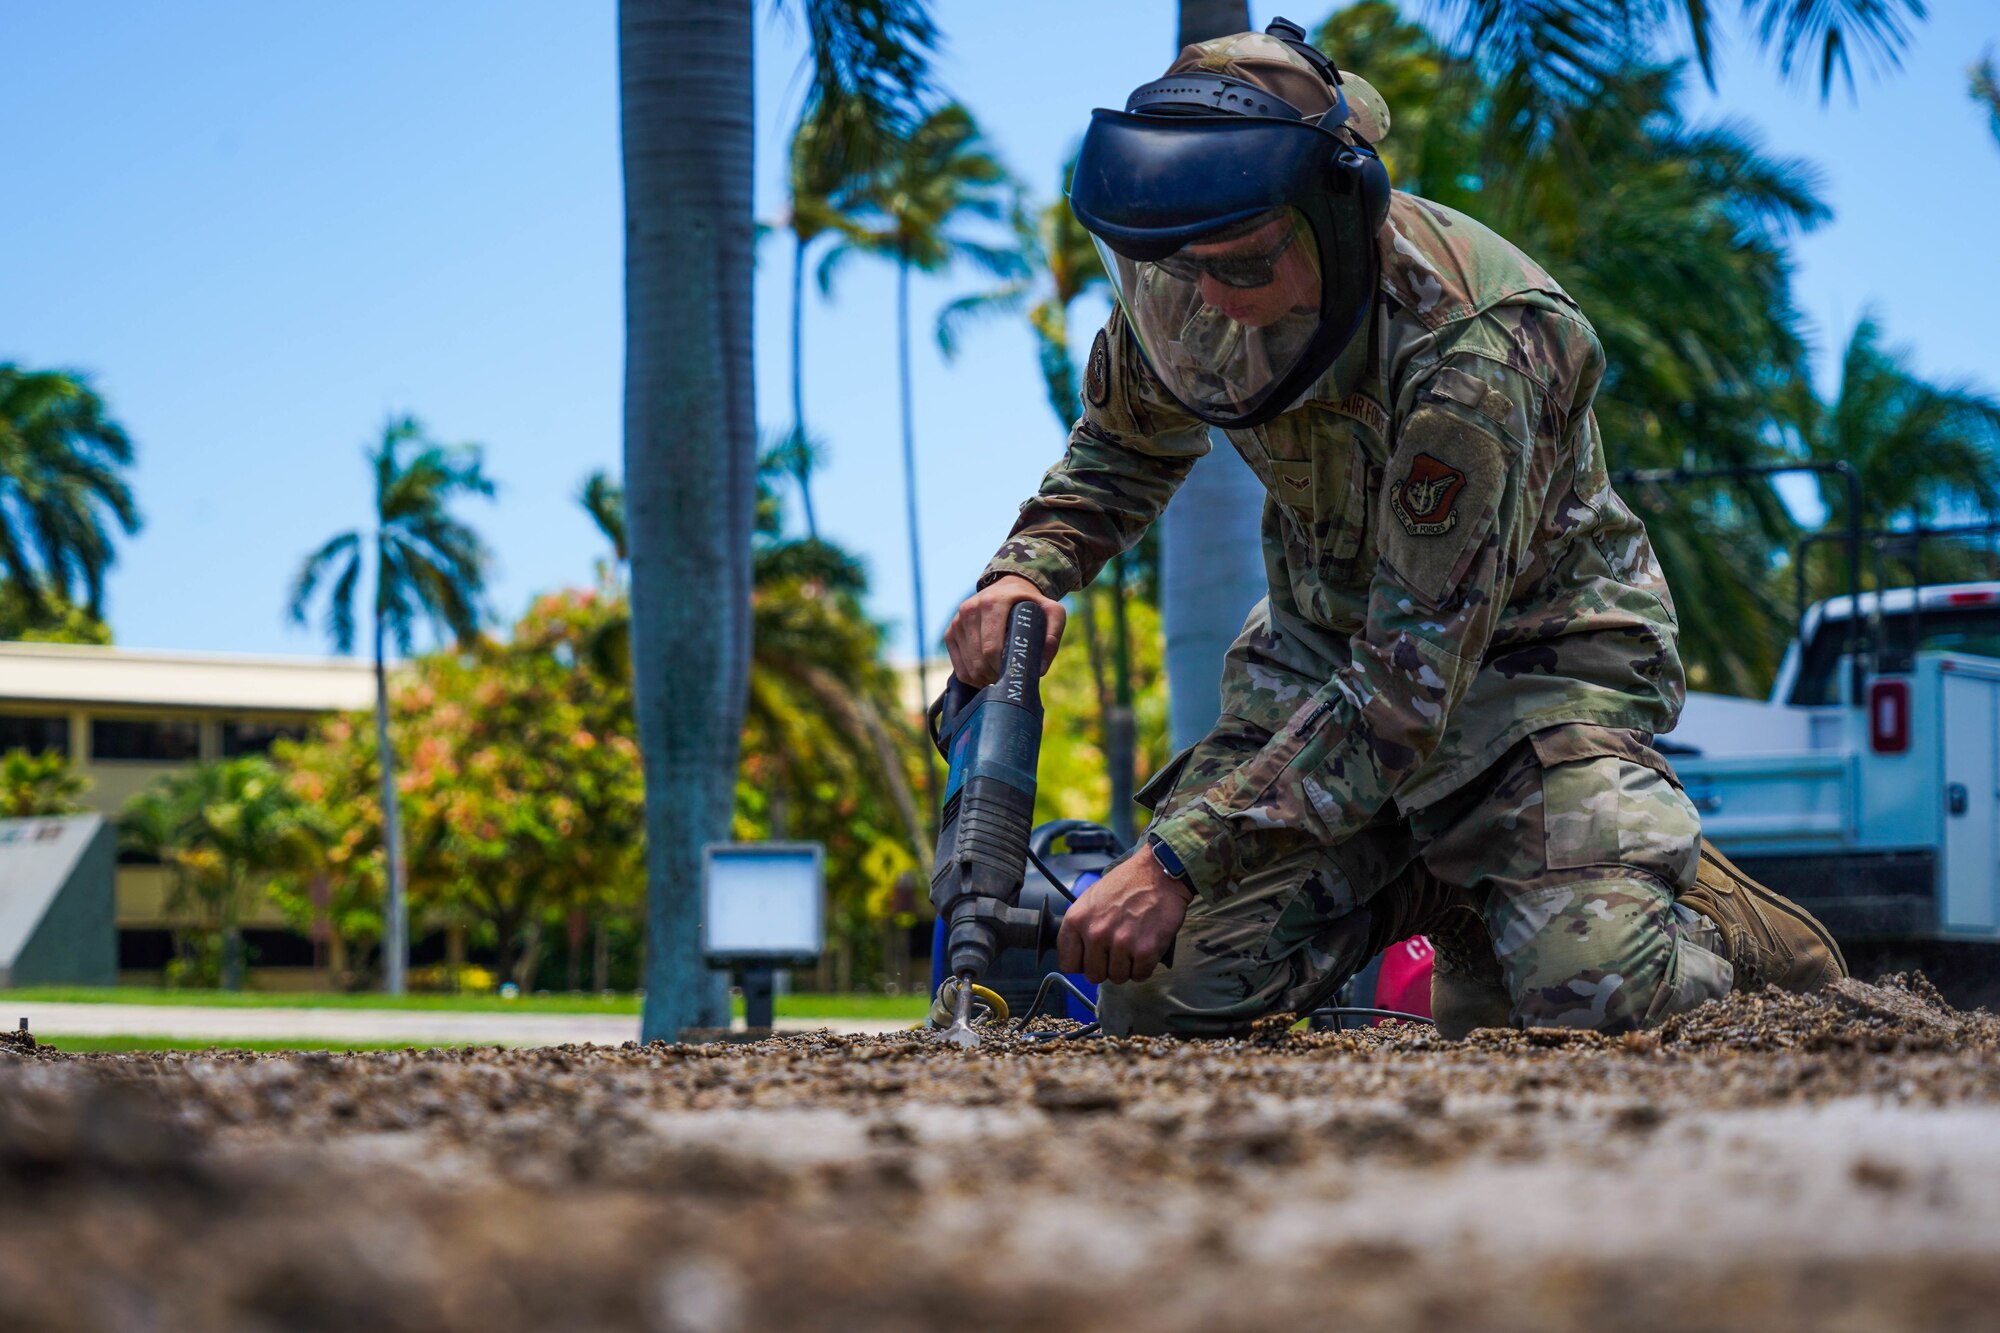 Airman 1st Class Tyler Williams, 647th Civil Engineer Squadron structures journeyman, clears the static display pad at Joint Base Pearl Harbor-Hickam, Hawaii, August 3, 2021. The static display pad is scheduled to house two new model aircraft to be displayed in front of the 15th Wing Headquarters building. (U.S. Air Force photo by Airman 1st Class Makensie Cooper)